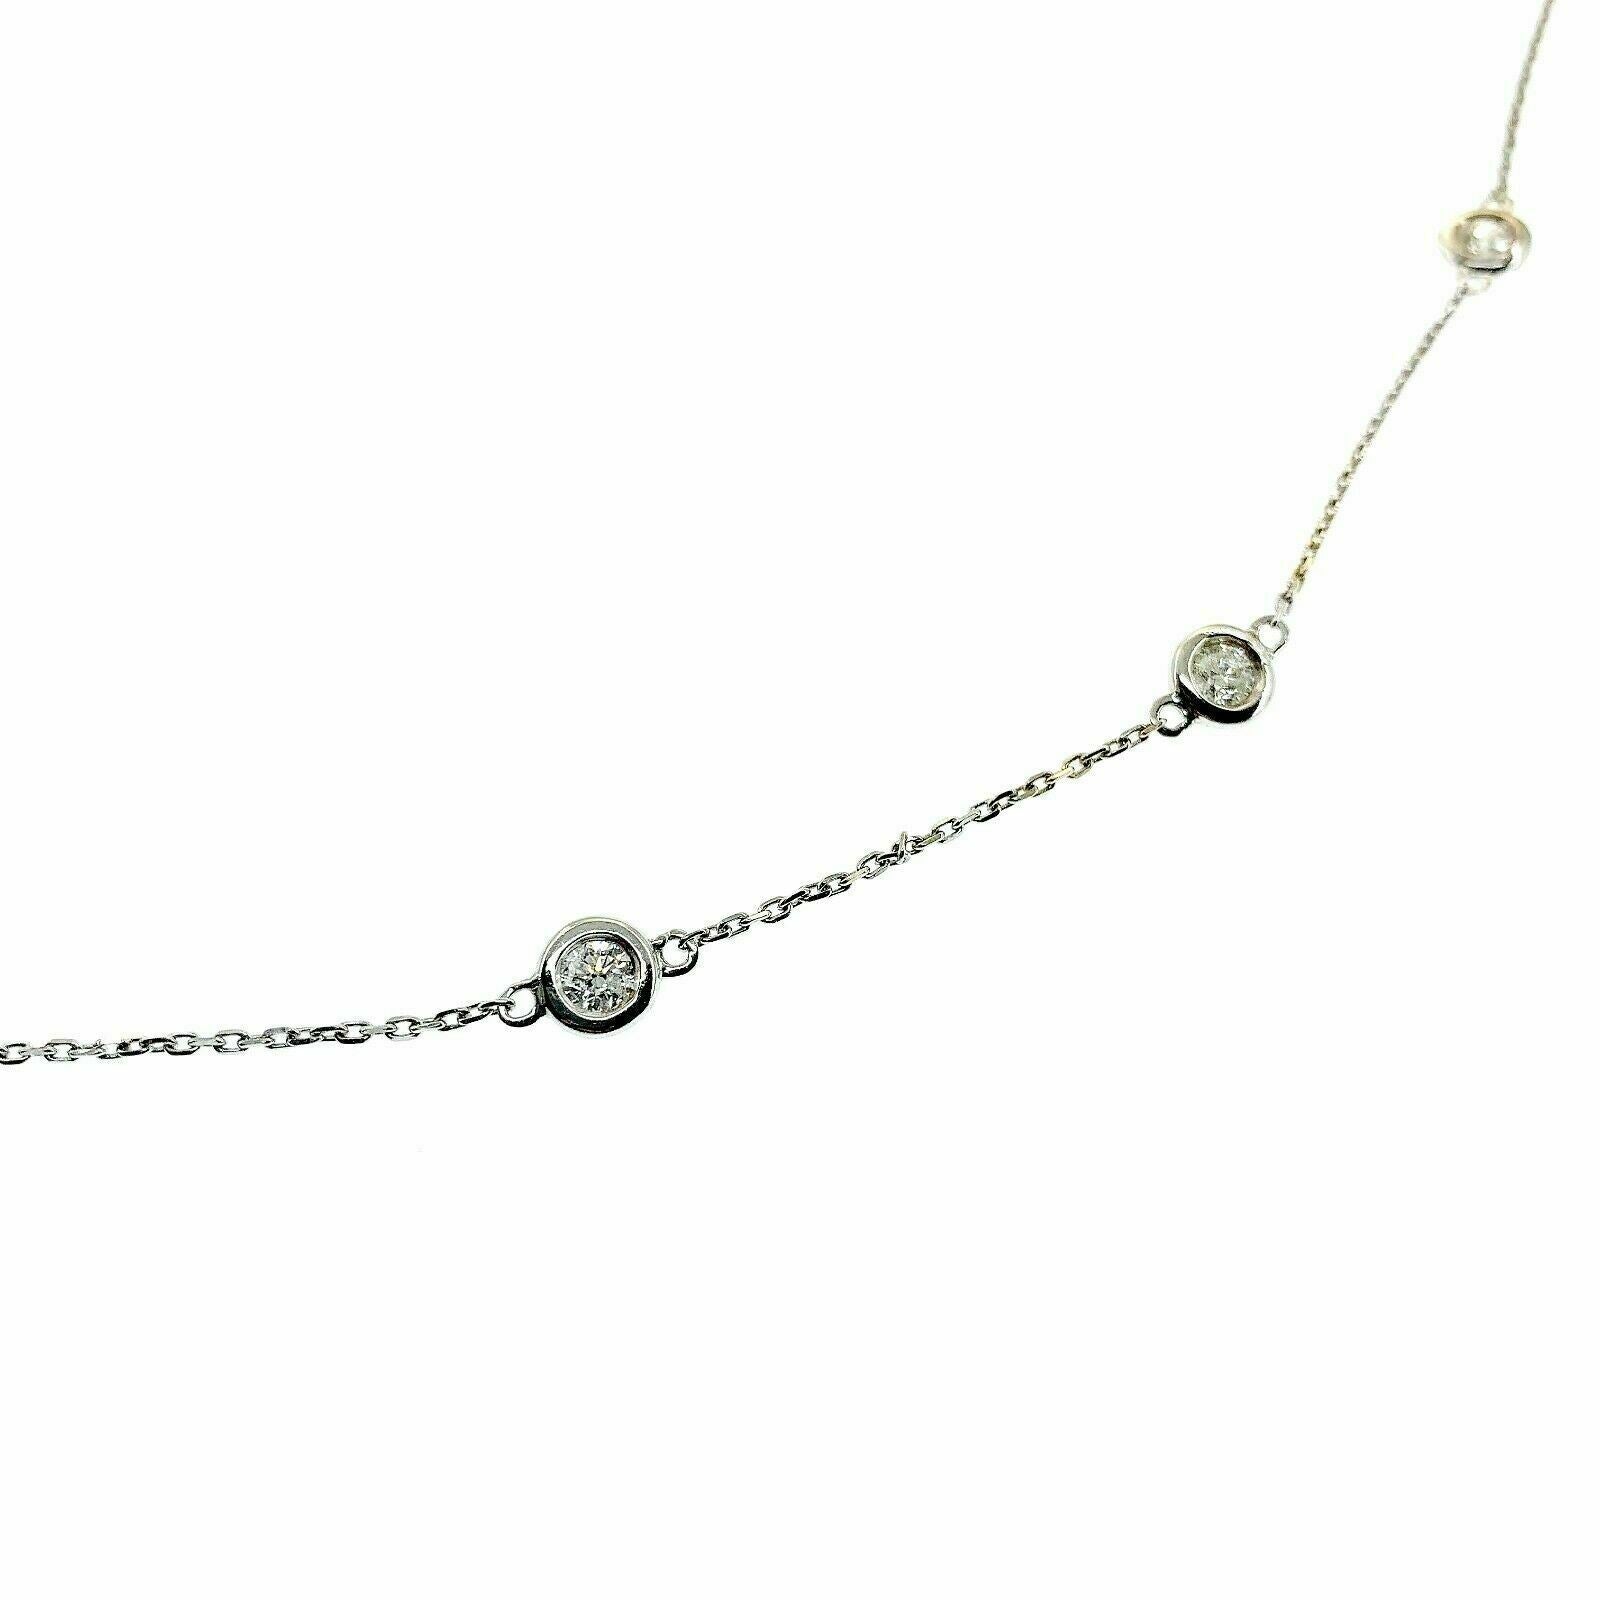 1.40 Carats t.w. Hand Assembled Diamond by The Yard Necklace Chain 14K Gold